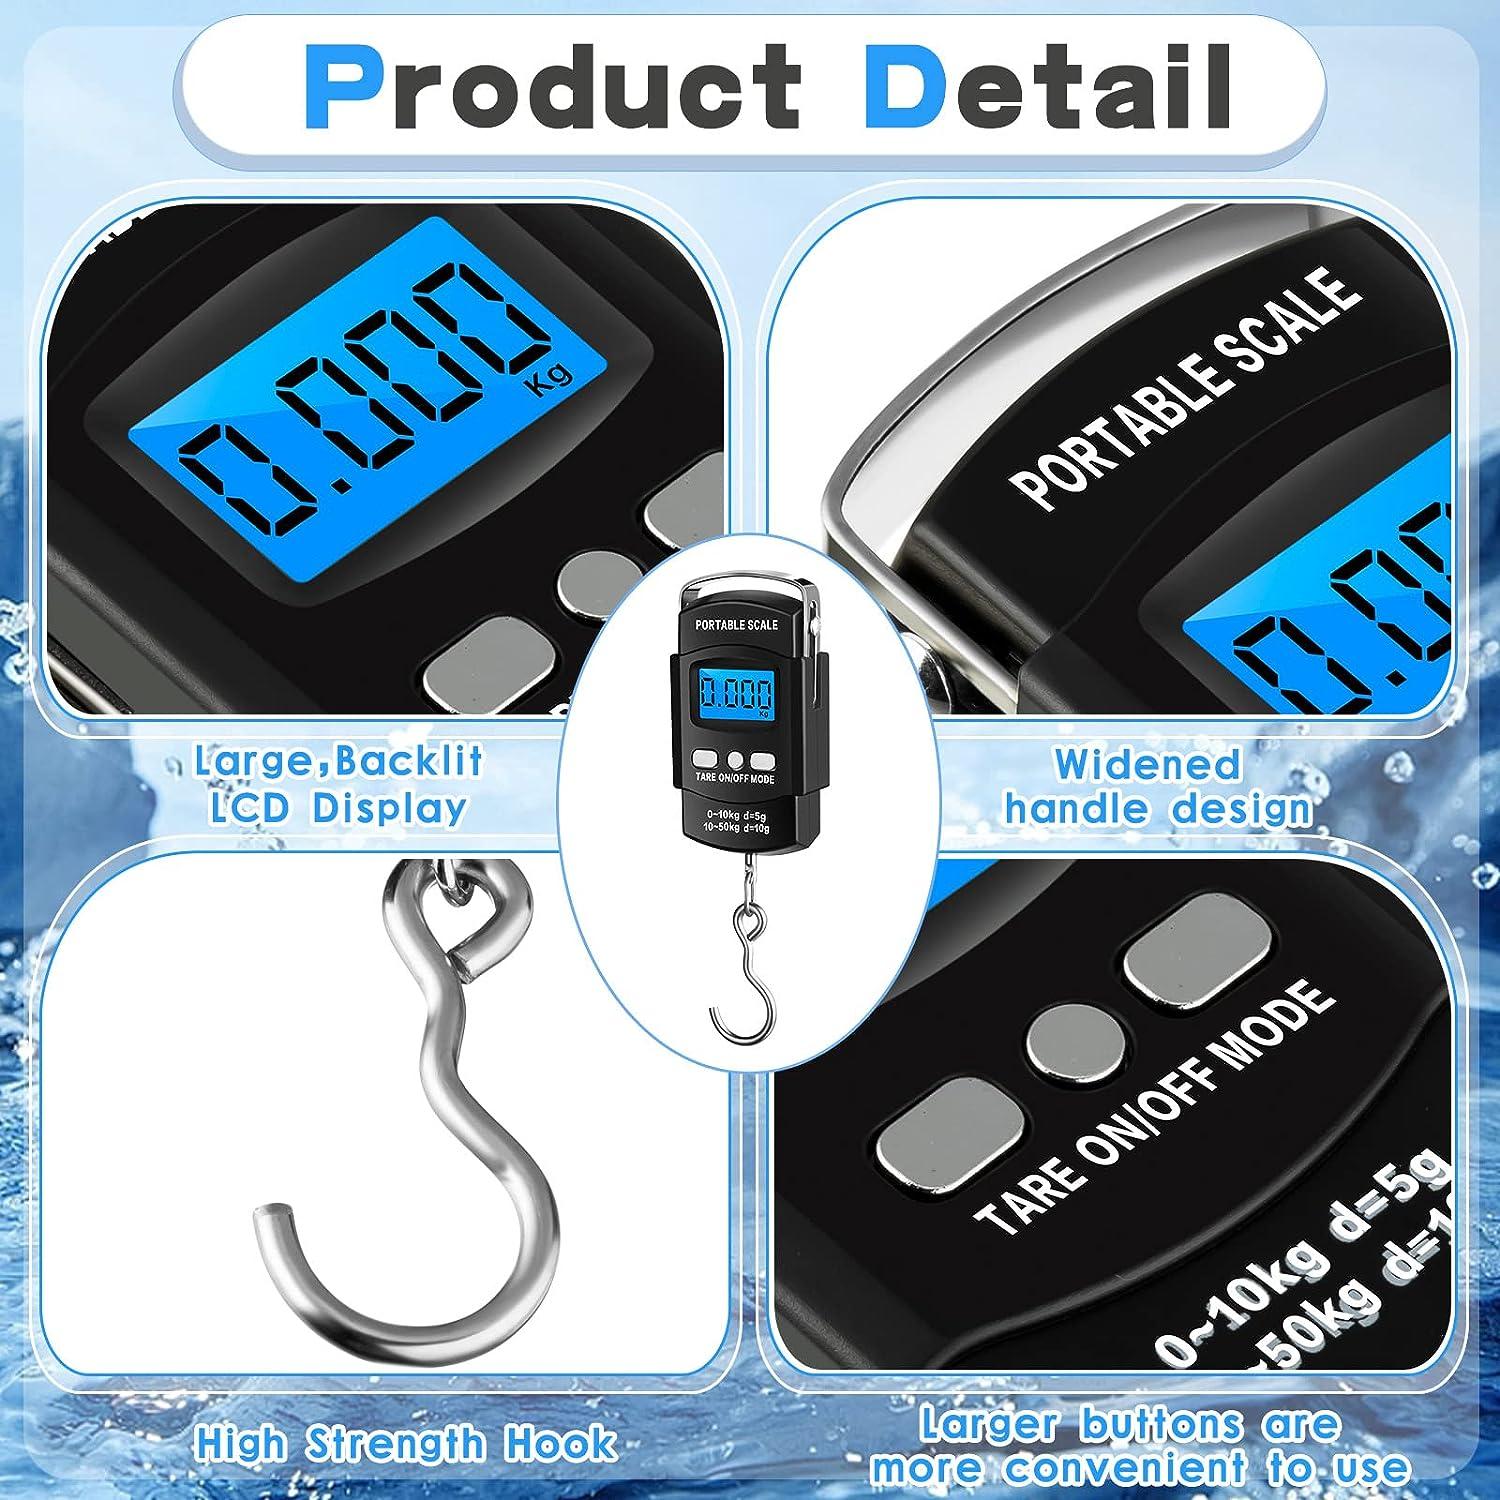 4 Pcs Digital Fish Scale 110lb/ 50kg Weight Capacity Electronic Hanging Scale  Portable Dial Fishing Scale with Tape Measure, Hook, Backlit LCD Display  Fishing Gifts for Men Women Postal Luggage Bag